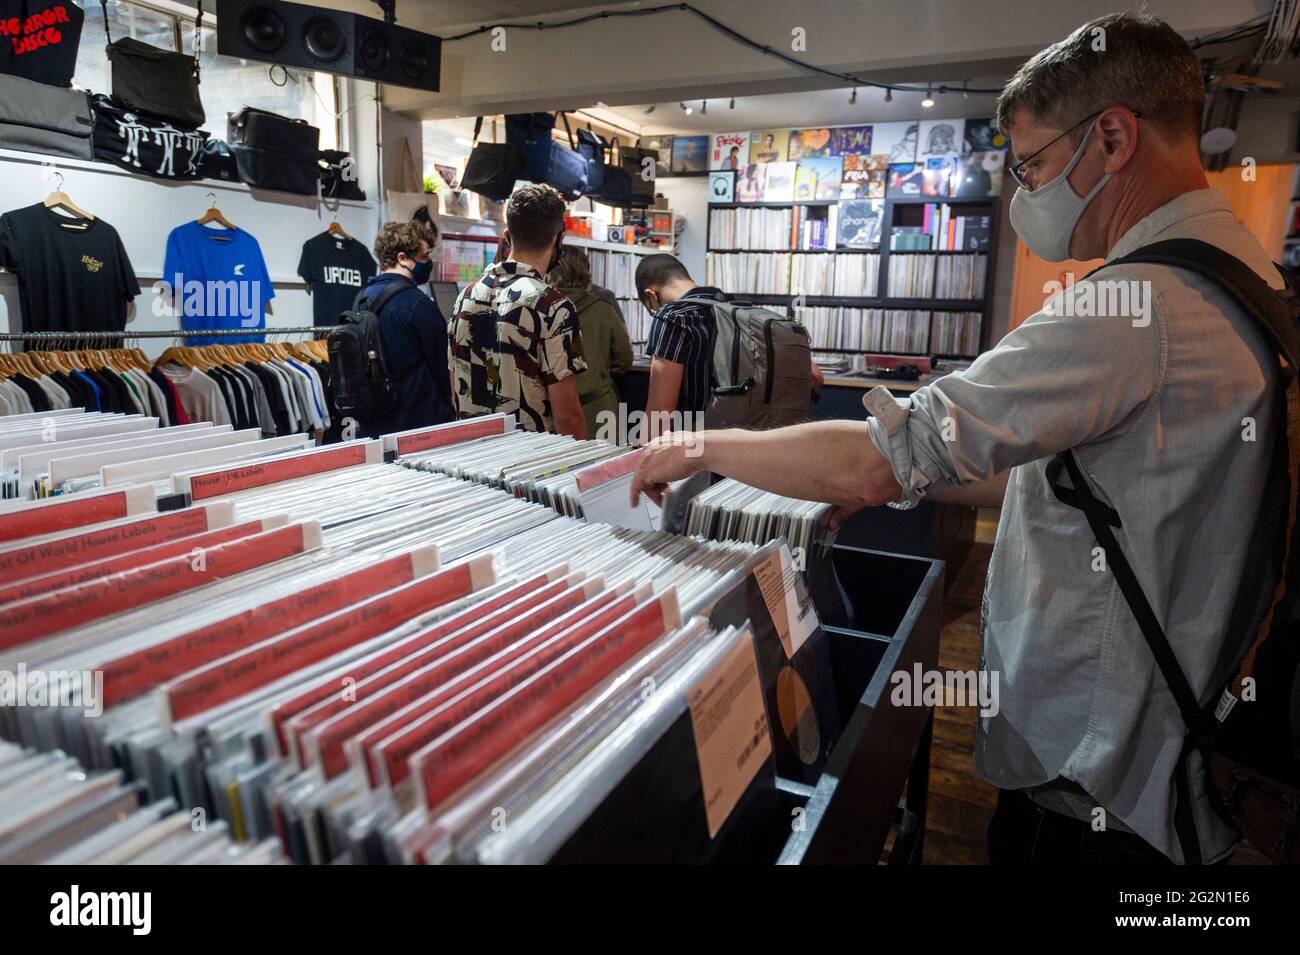 London Uk 12 June 21 Customers In Phonica Records In Soho On Record Store Day Where Independent Record Shops Worldwide Celebrate Music Including Special Vinyl Releases Made Exclusively For The Day In